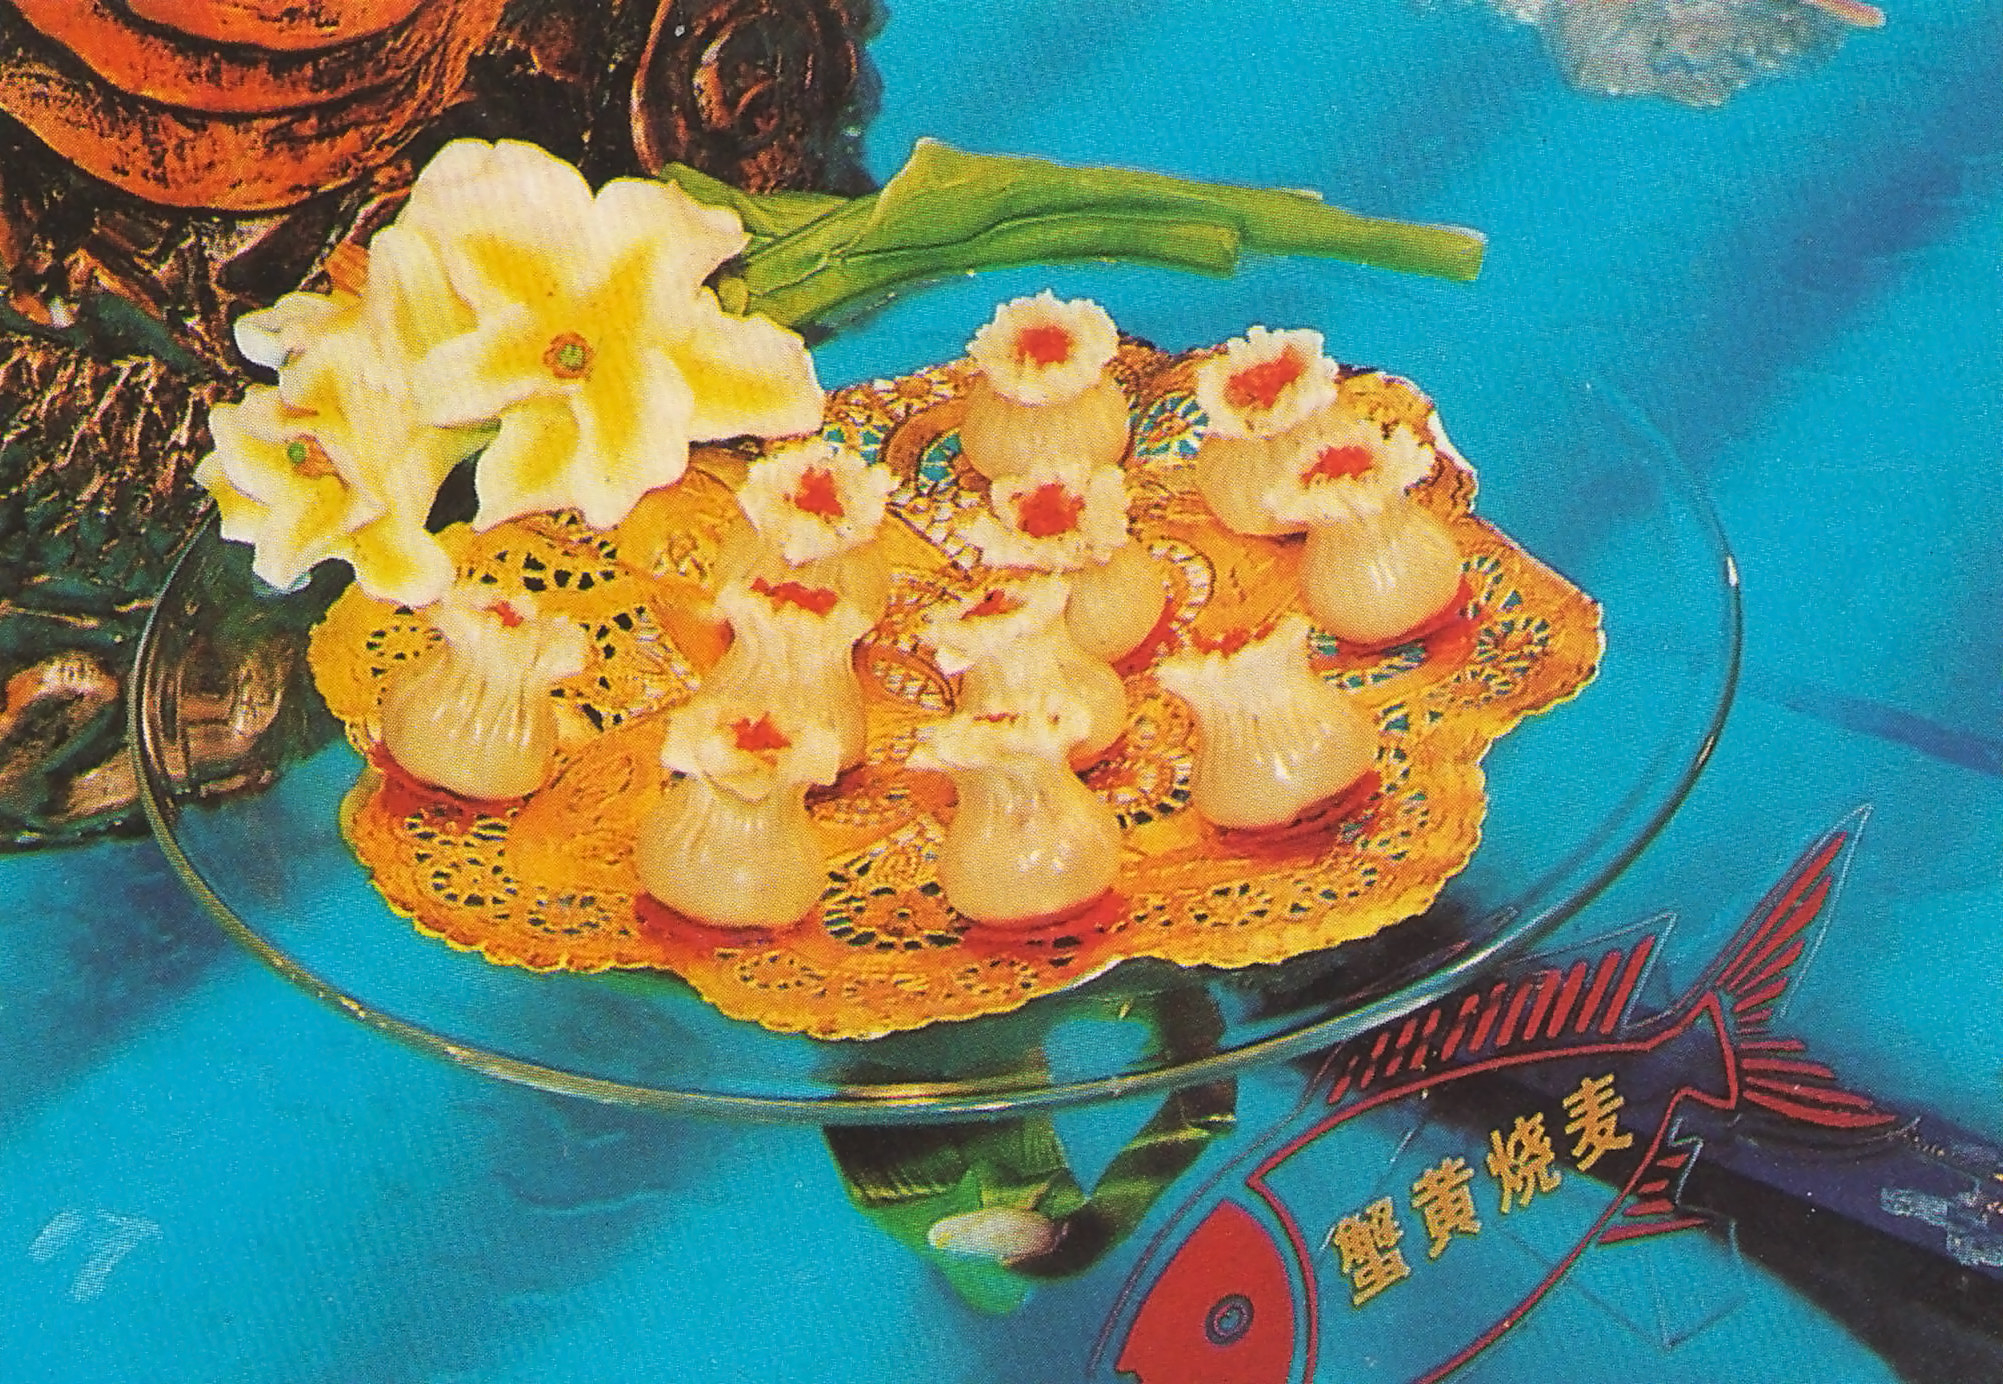 Flowers made out of dumplings